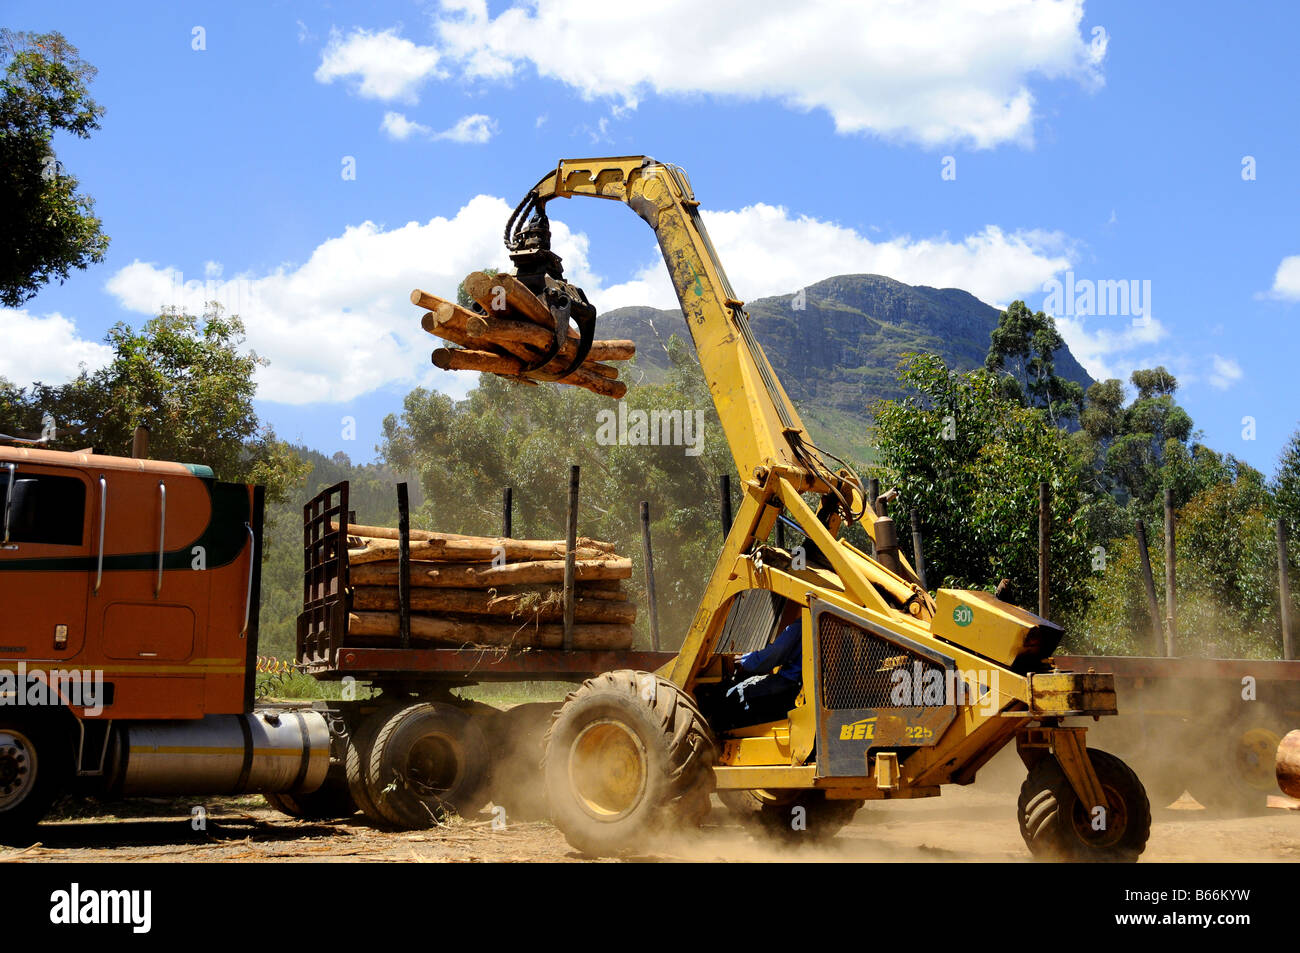 Skidder tractor loading timber Stock Photo